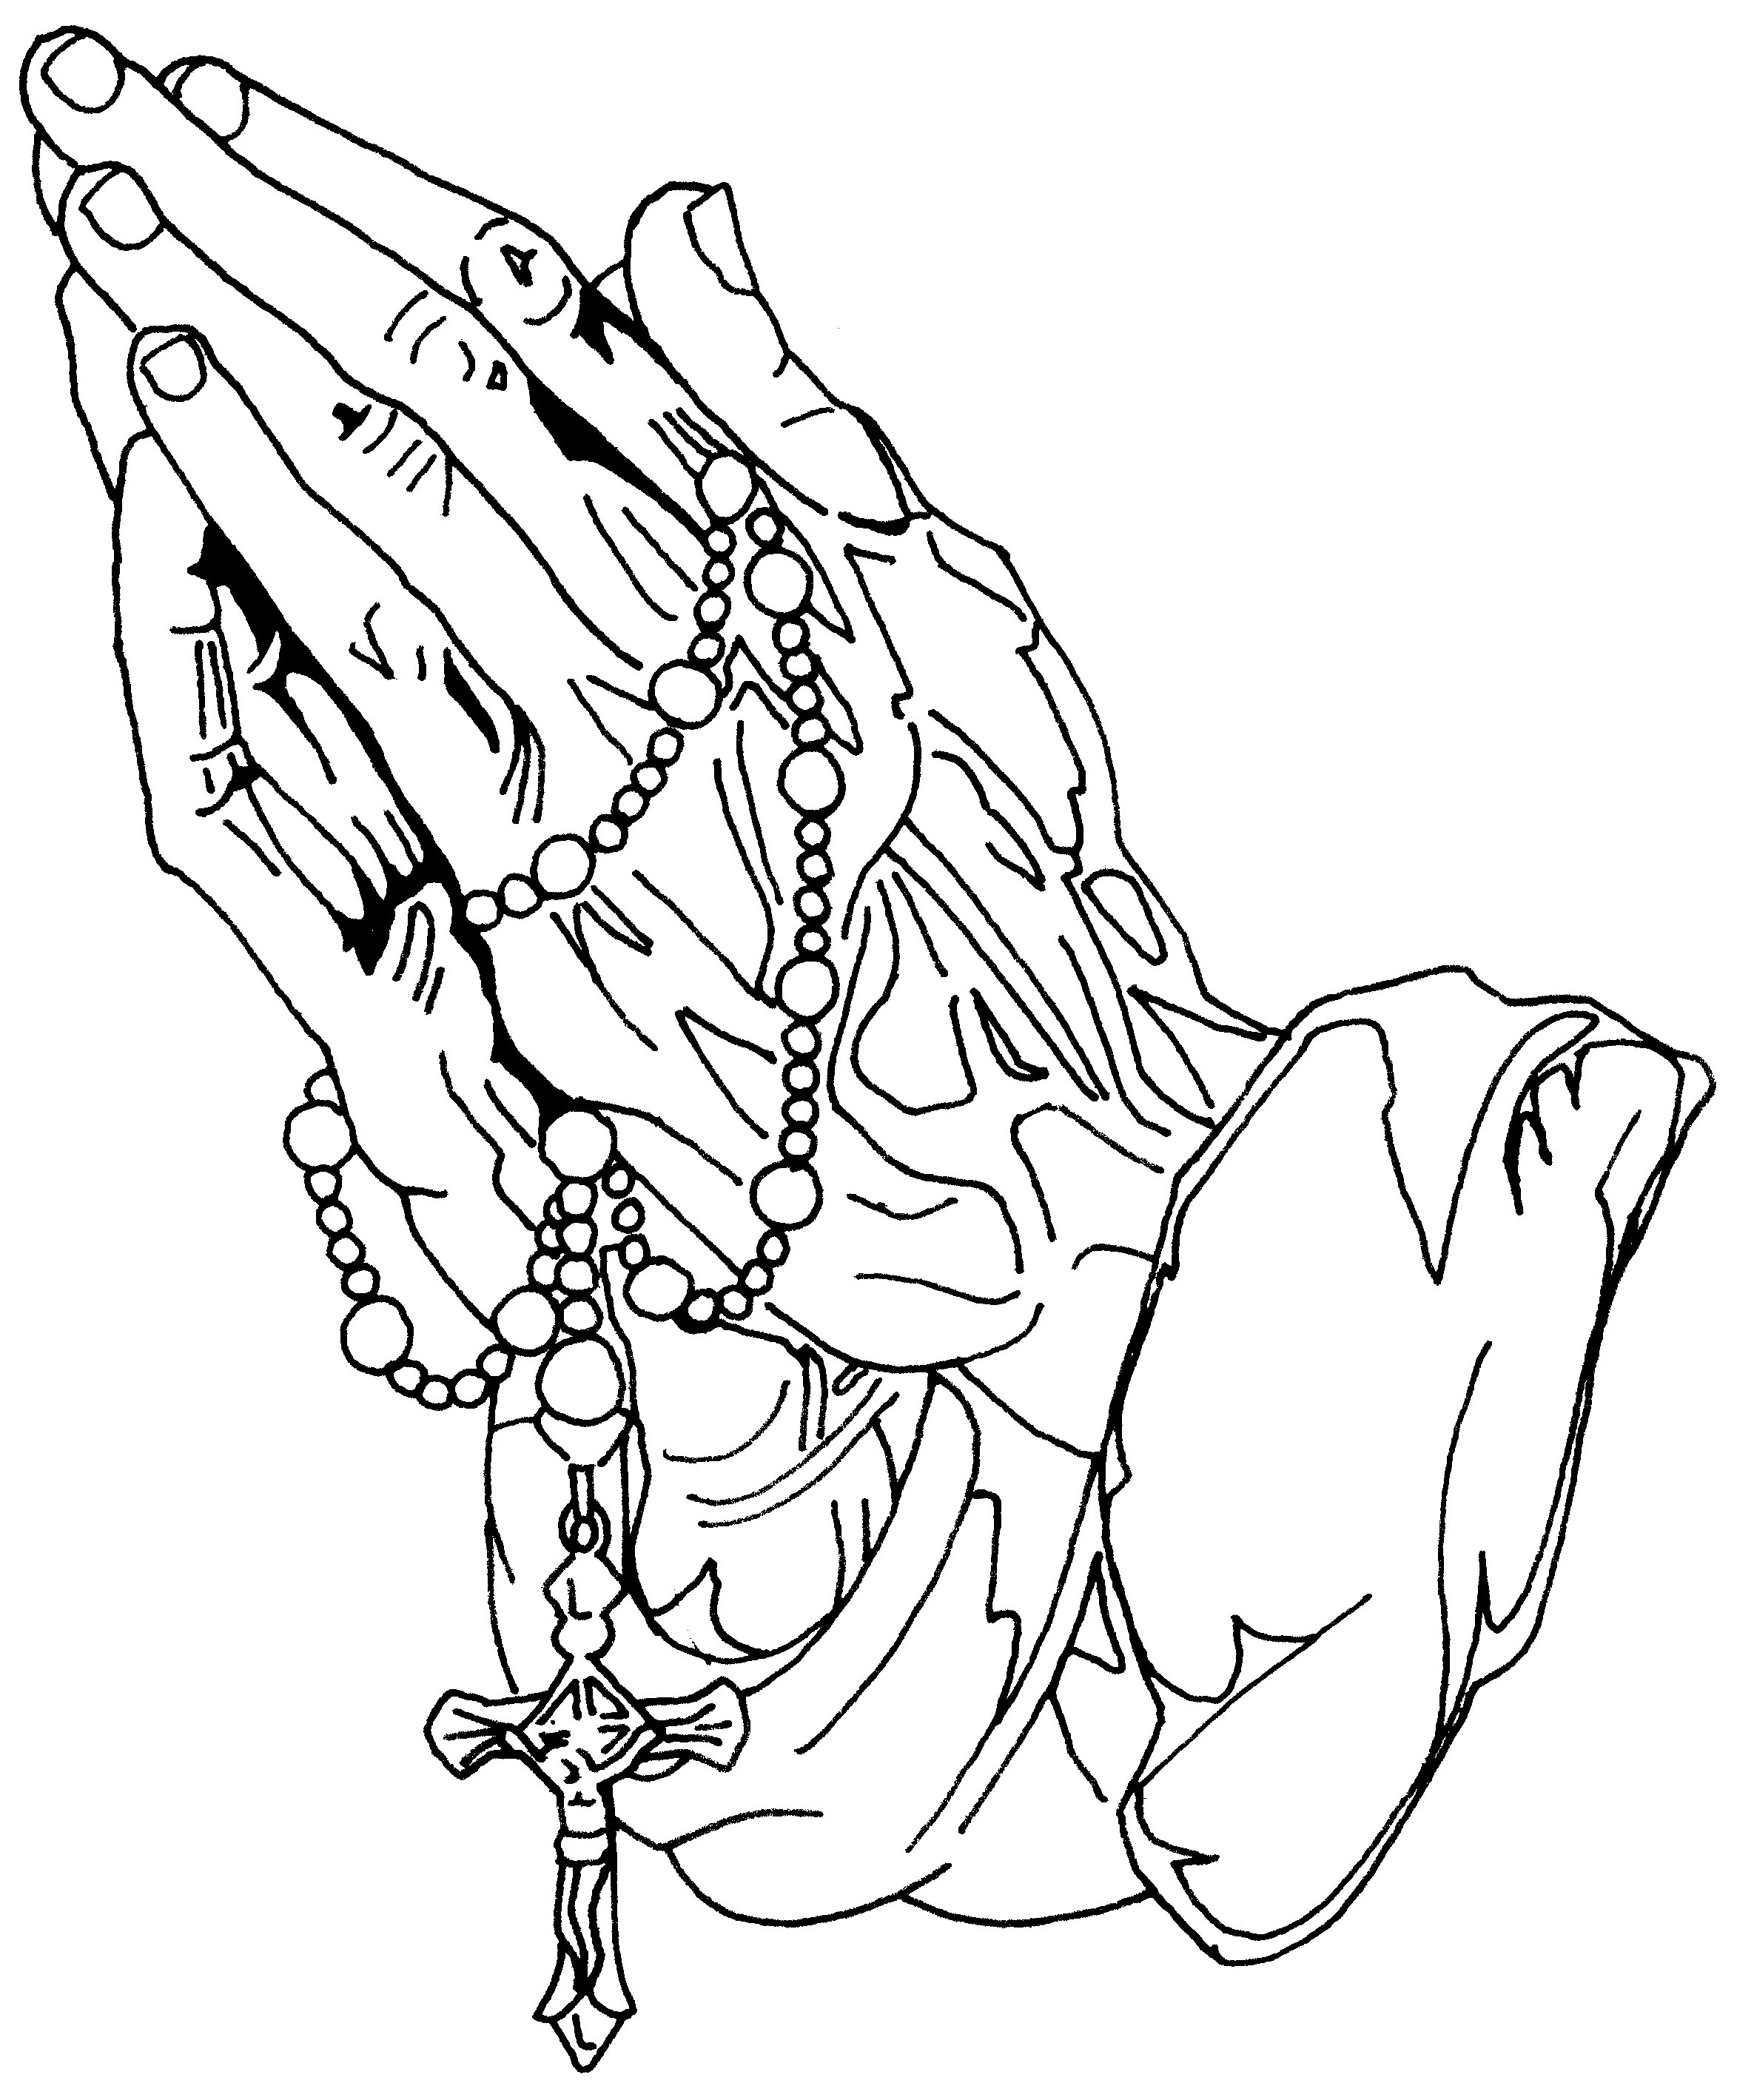 Prayer Hands Coloring Pages
 Praying Hands Tattoos Designs Ideas and Meaning